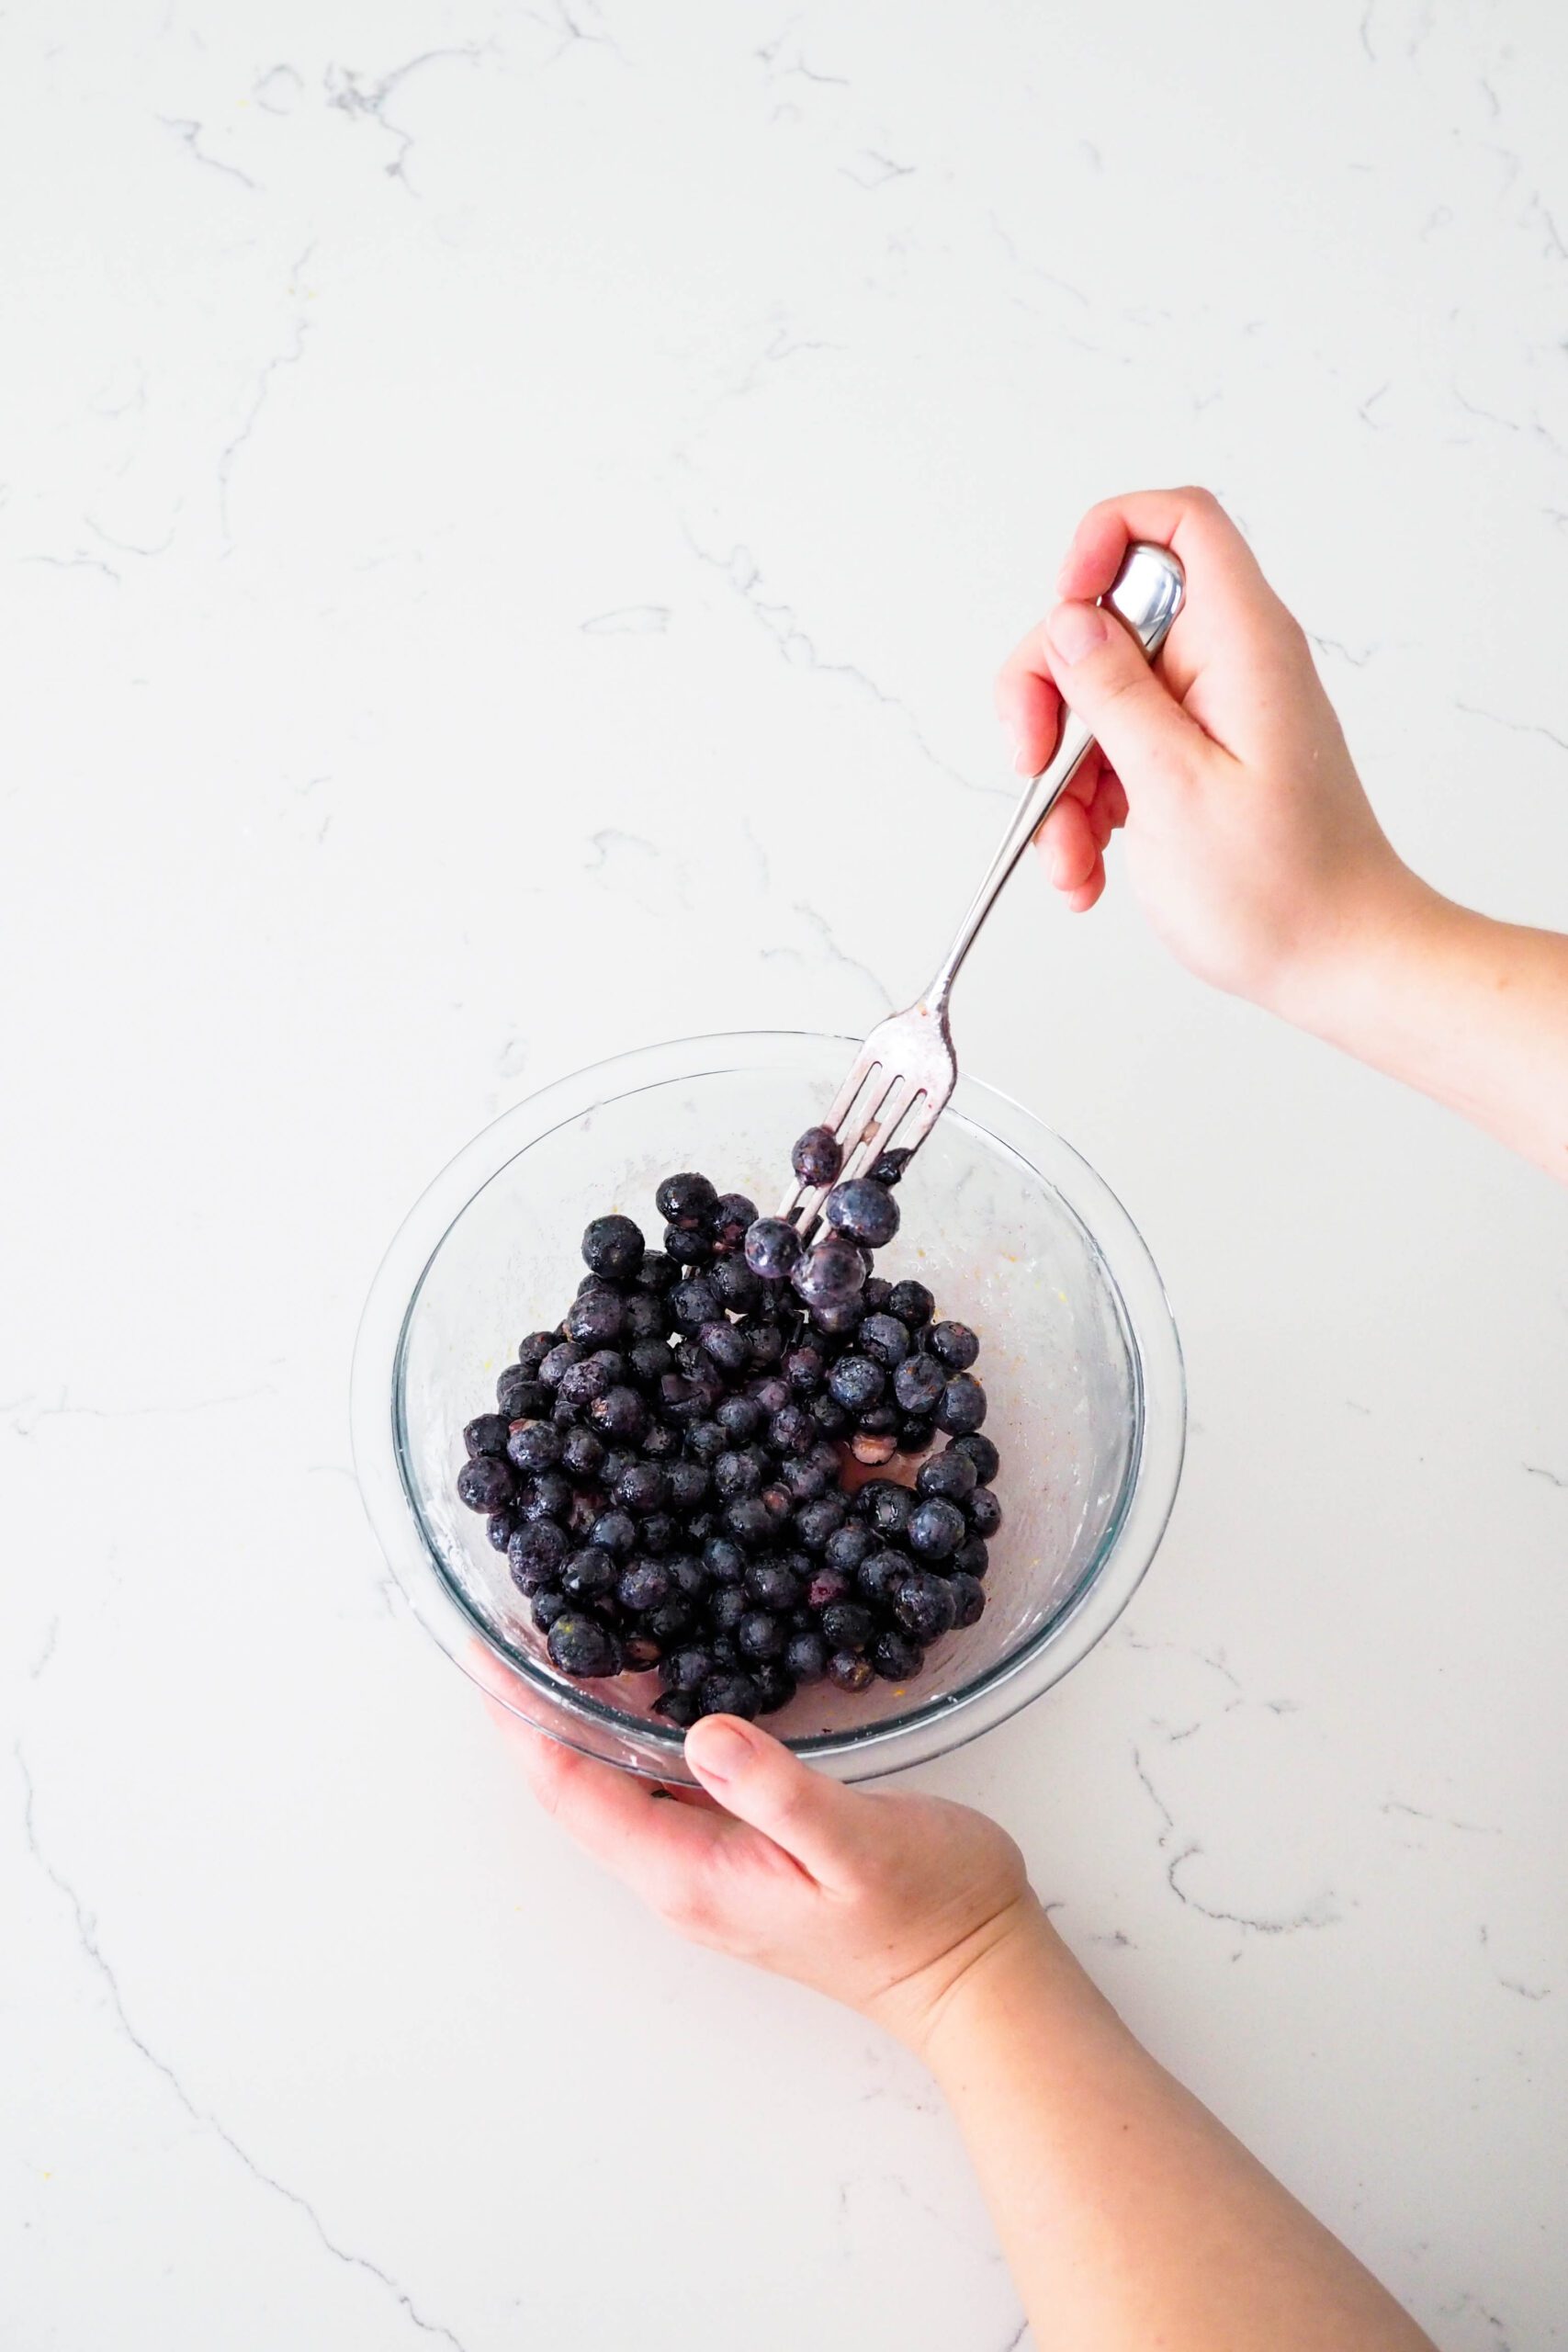 A hand pokes blueberries in a bowl with a fork.